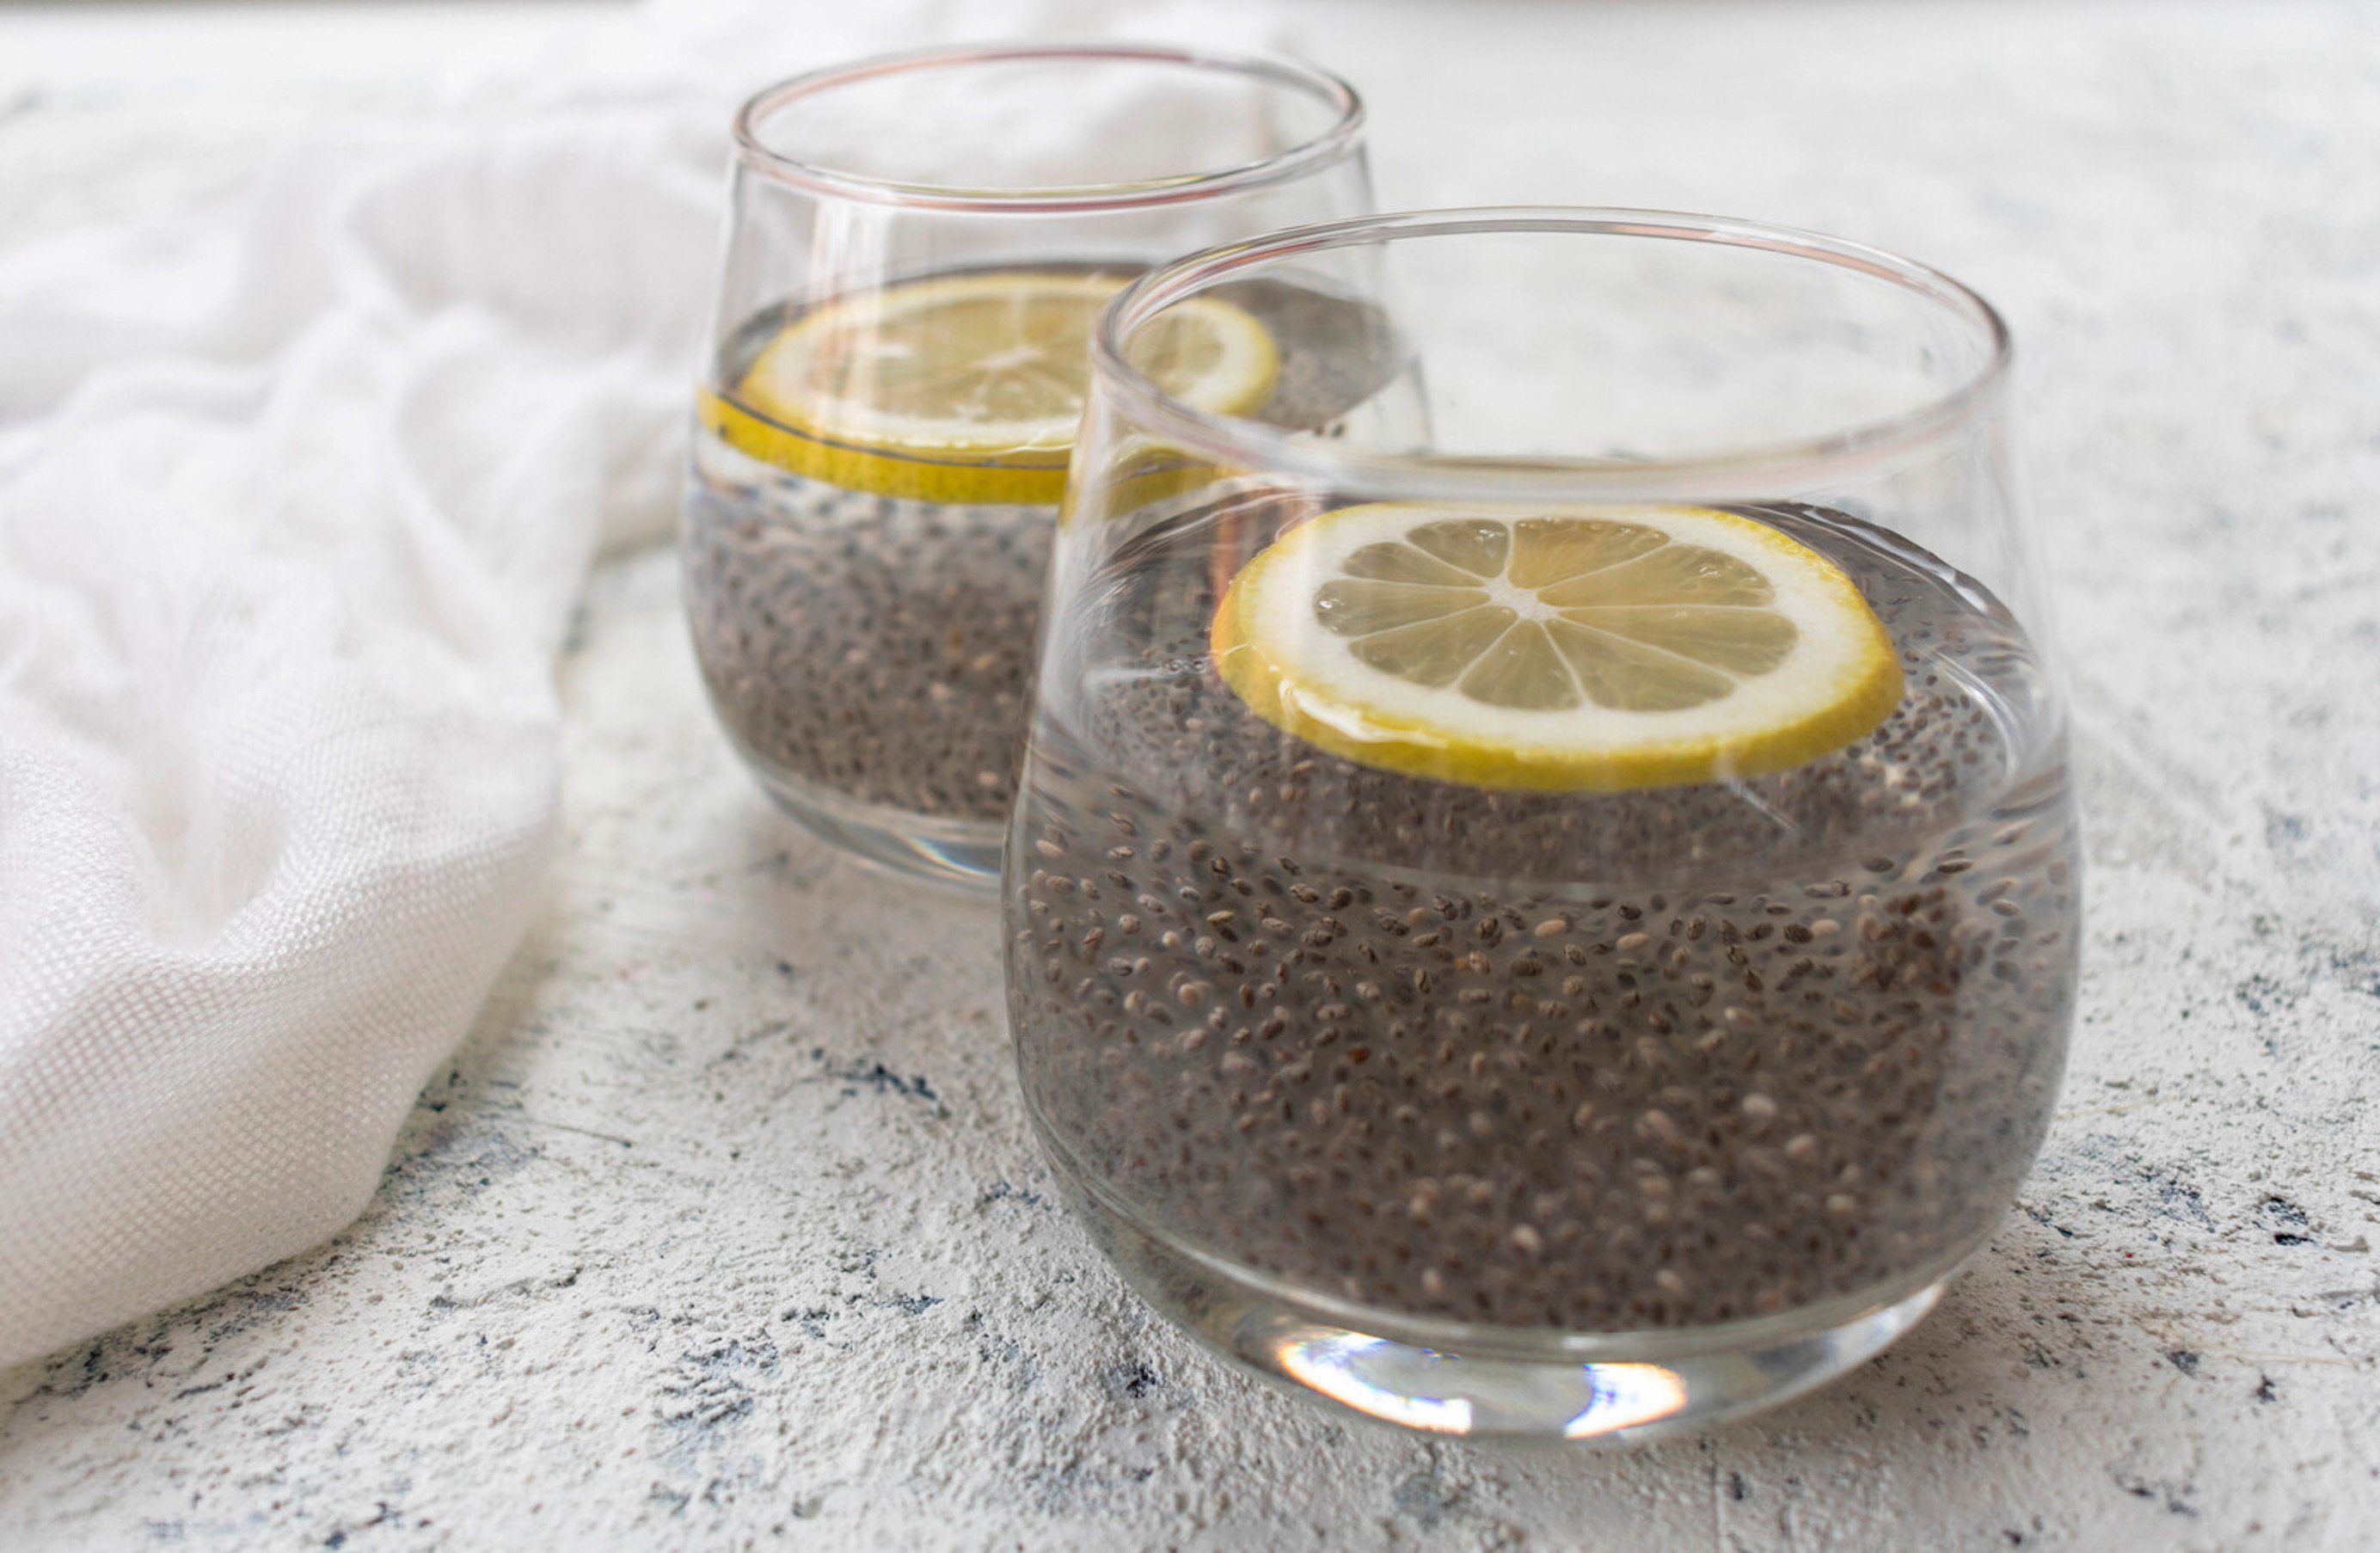 The “internal shower” is a drink made from chia seeds and lemon water that is supposed to relieve constipation, and which is currently a viral trend on TikTok. Photo: Daryl Gioffre